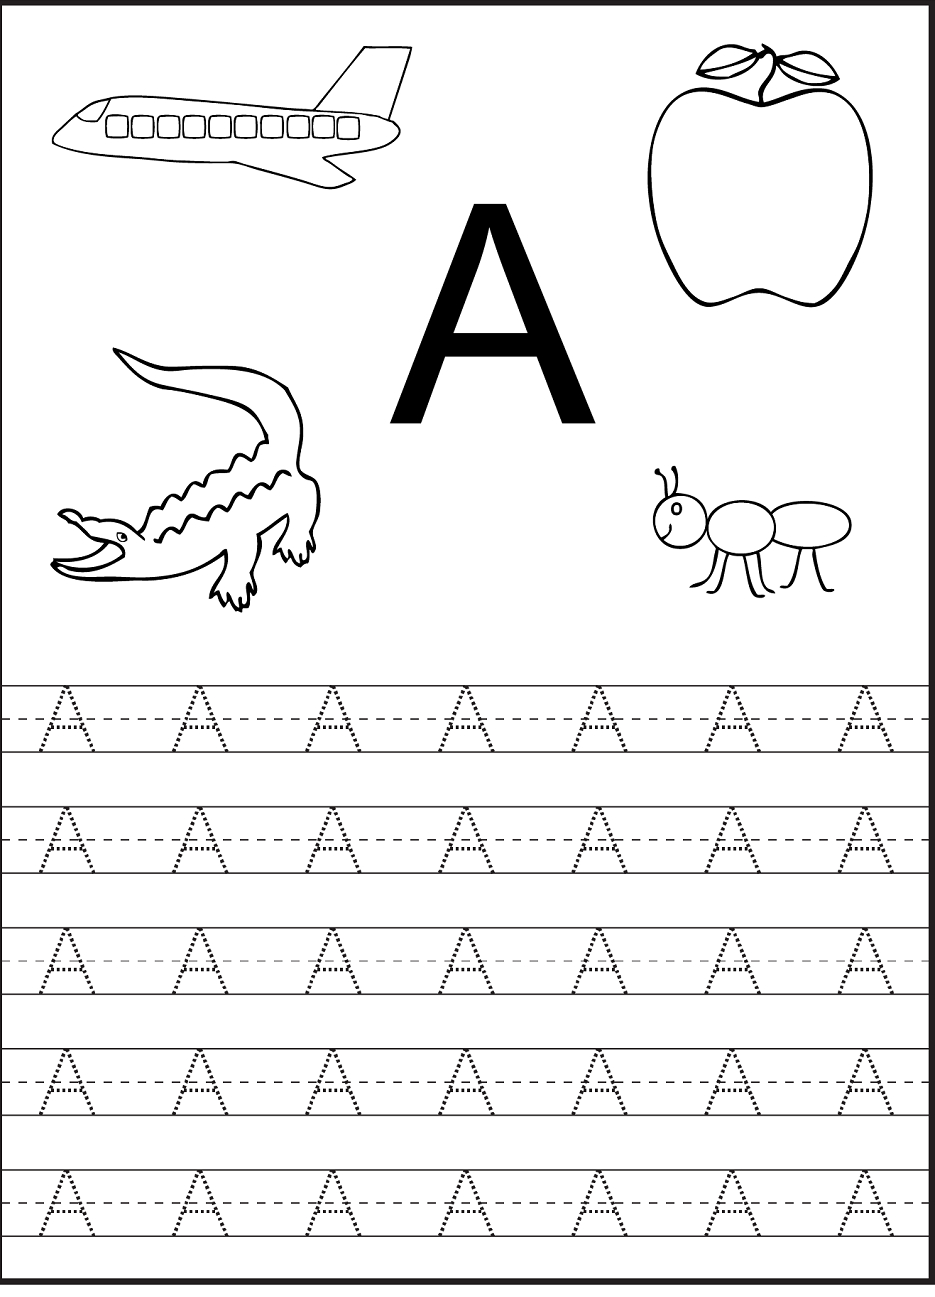 Tracing The Letter A Free Printable | Preschool Worksheets with Tracing Worksheets For Kindergarten On Letters